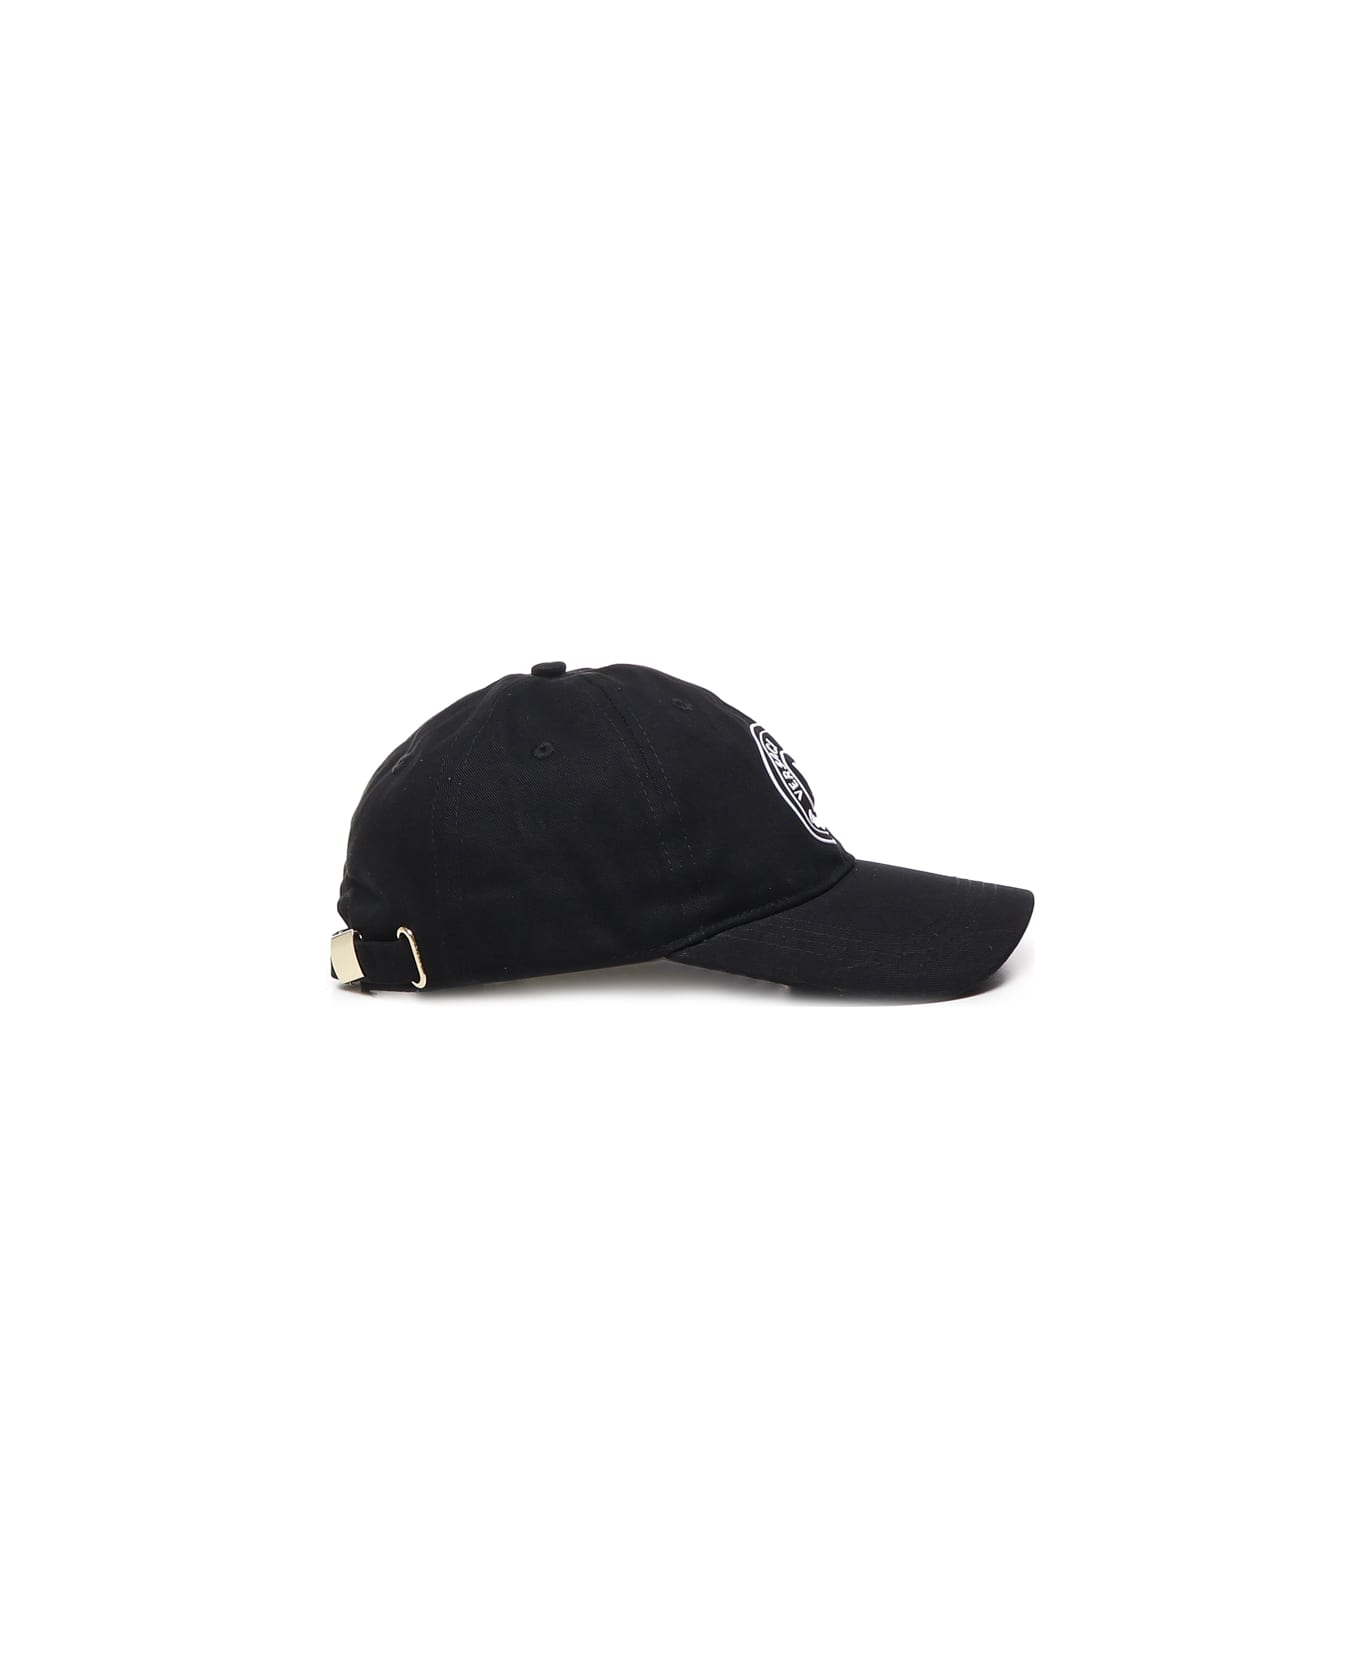 Versace Jeans Couture Printed Baseball Cap - Black/white